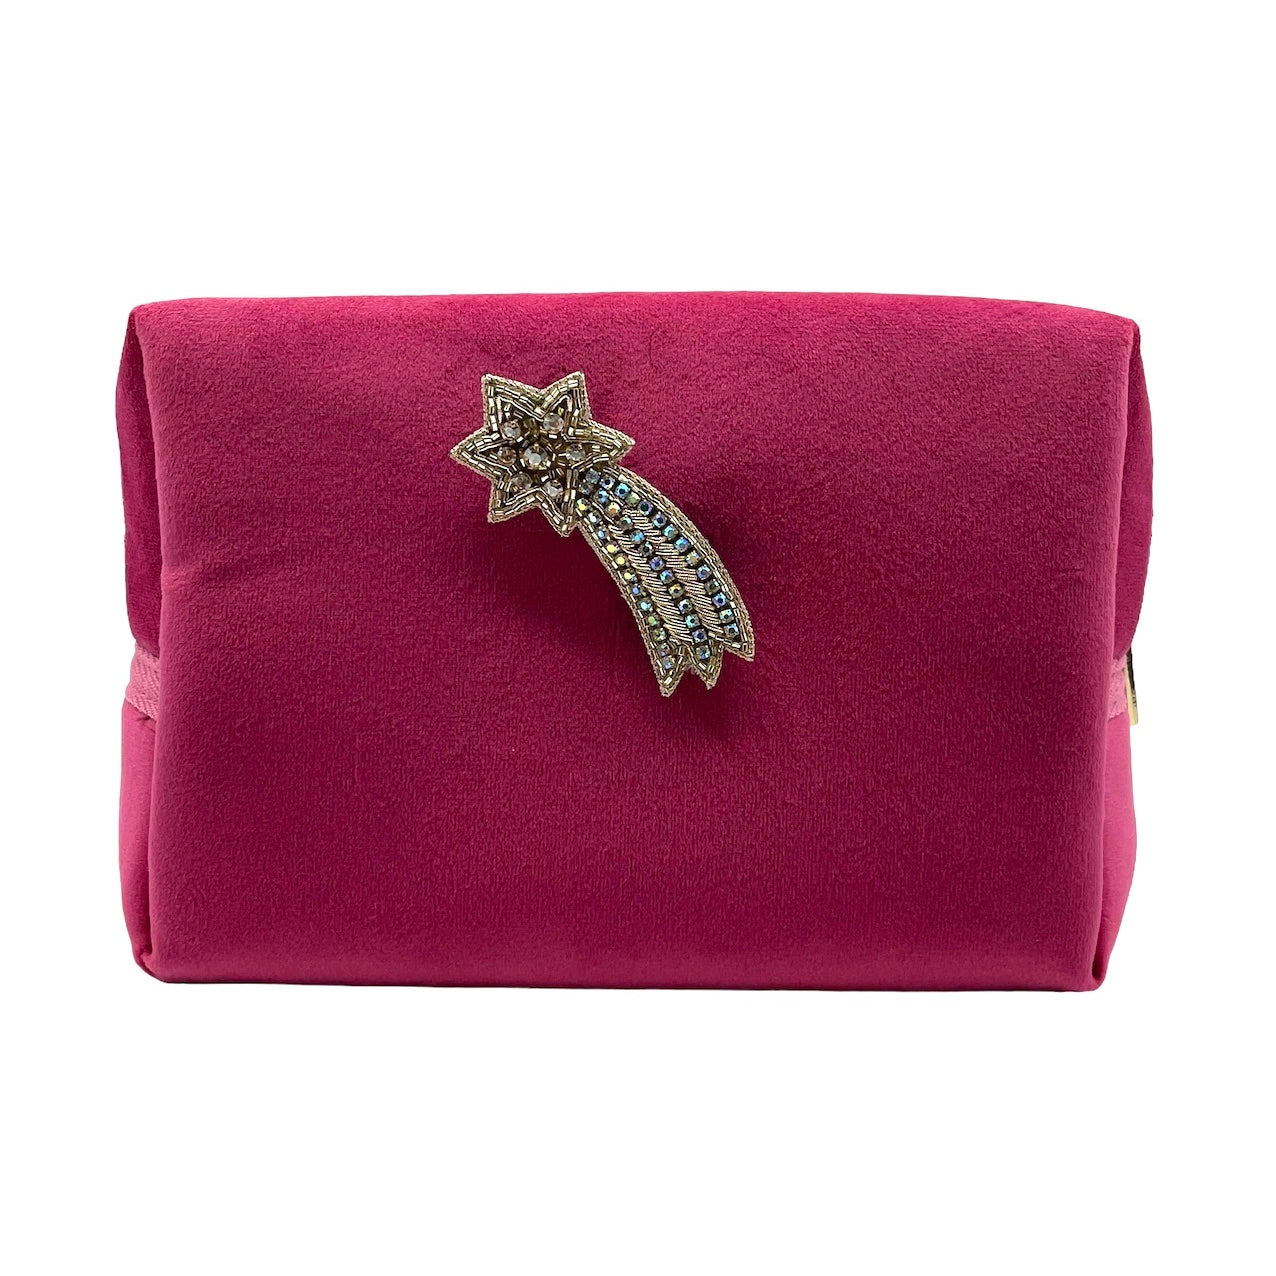 Bright pink make-up bag and a shooting star pin - recycled velvet